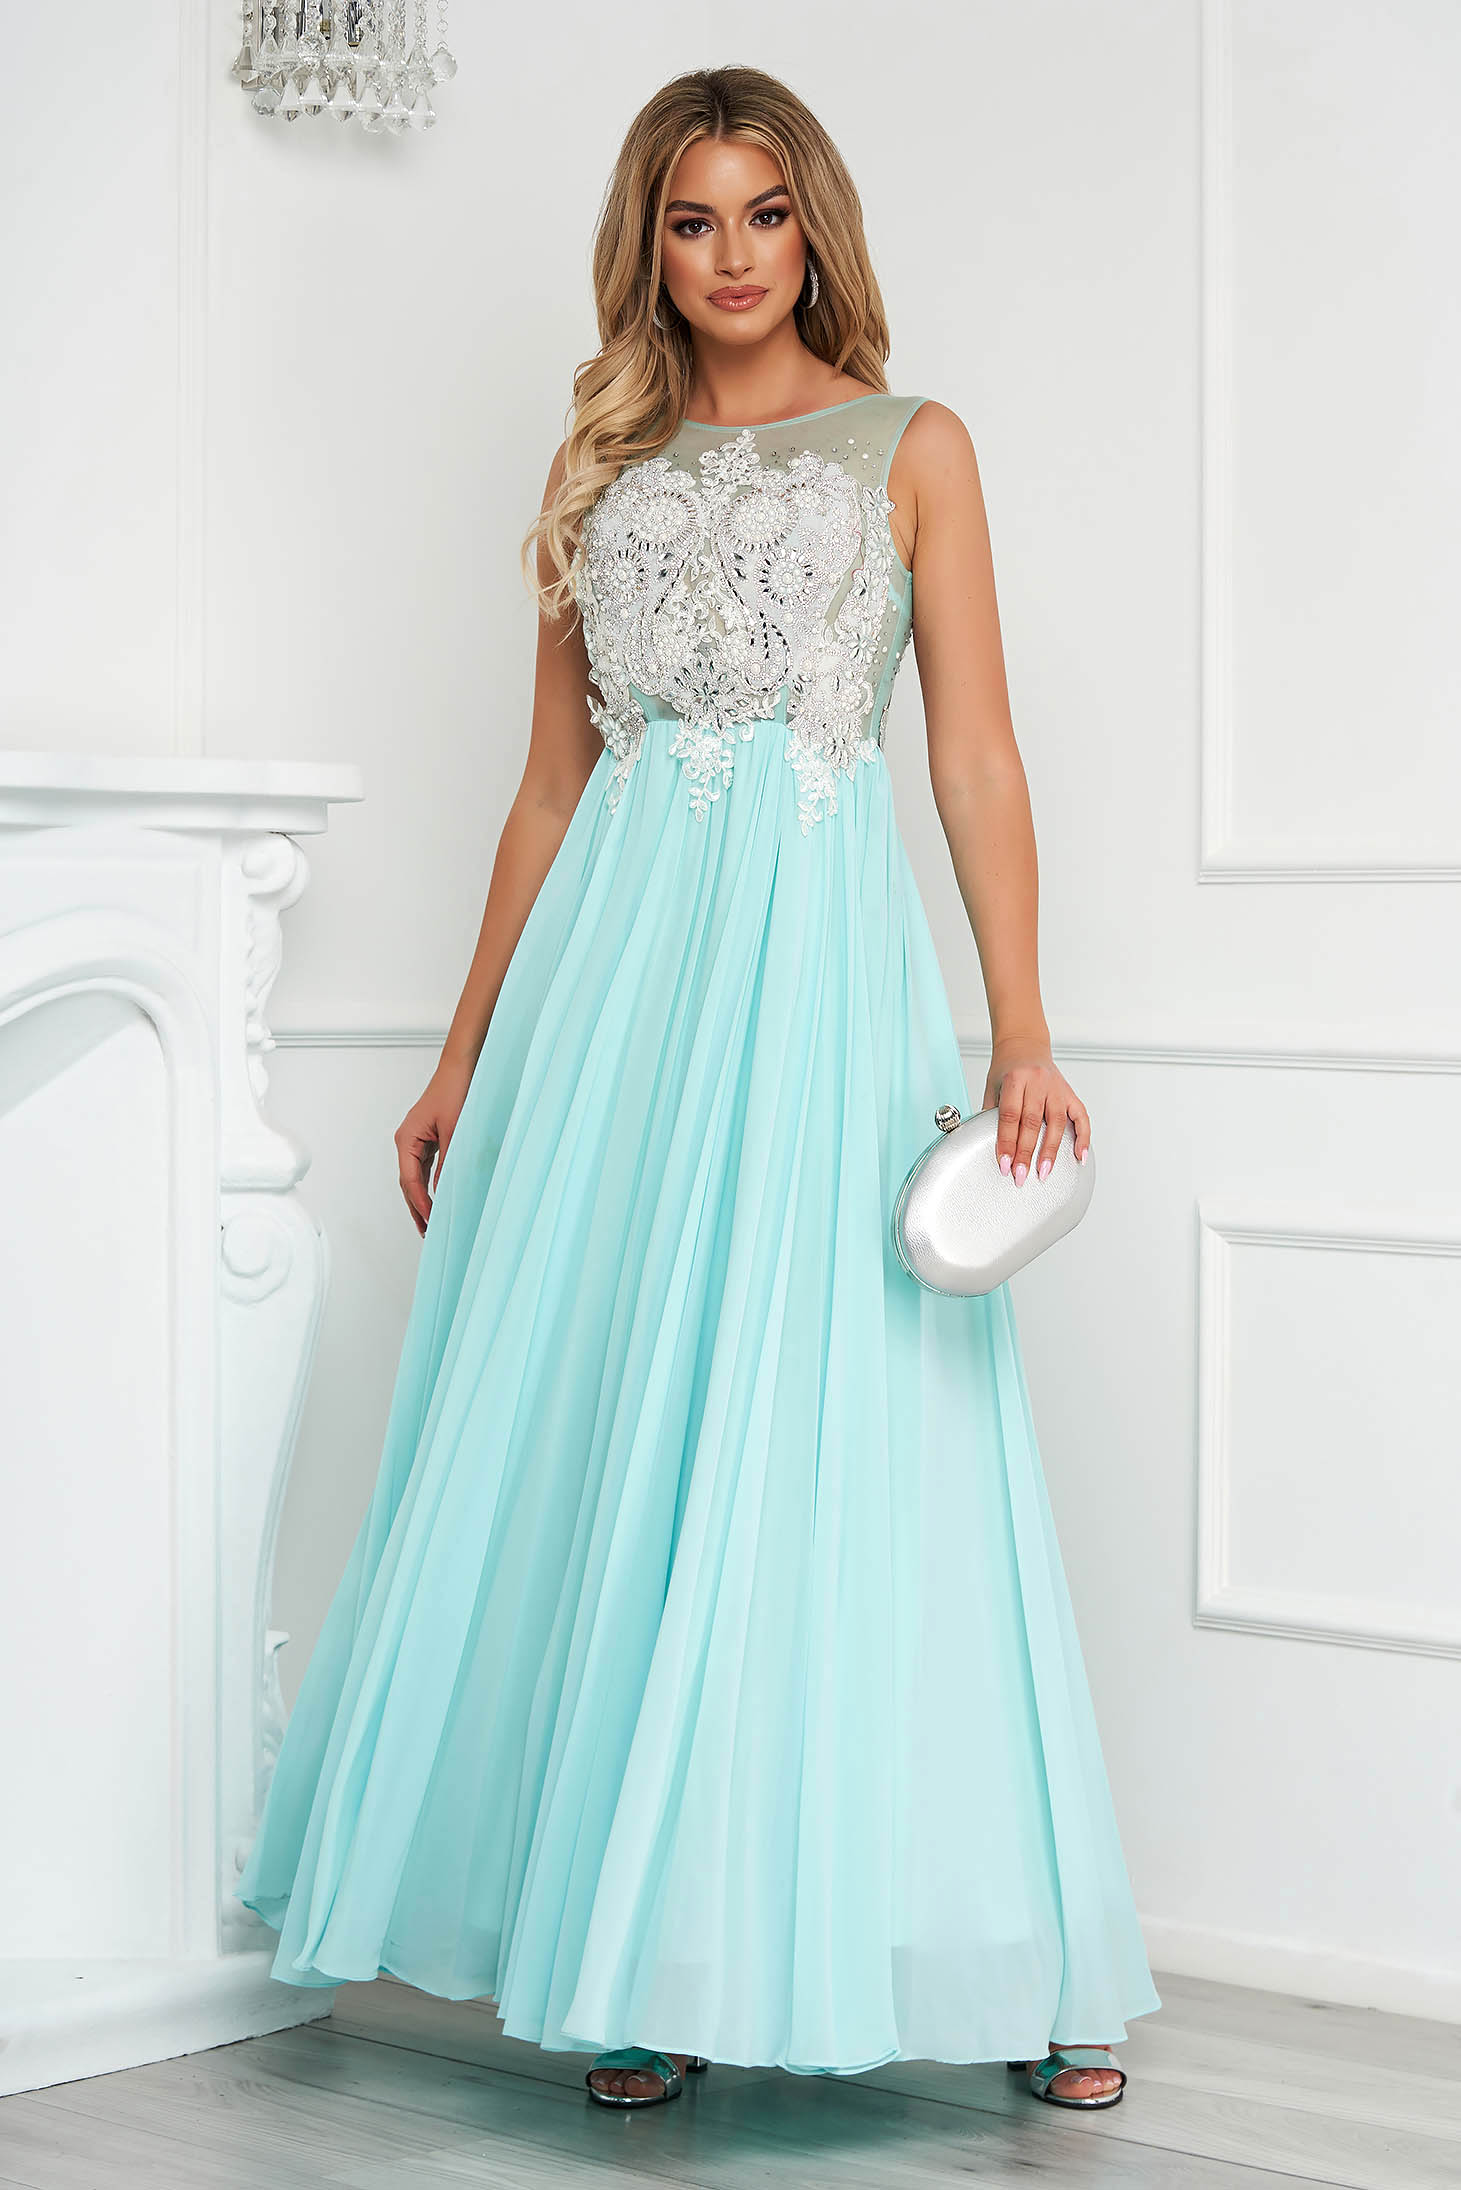 Aqua dress long cloche from veil fabric with crystal embellished details sleeveless occasional